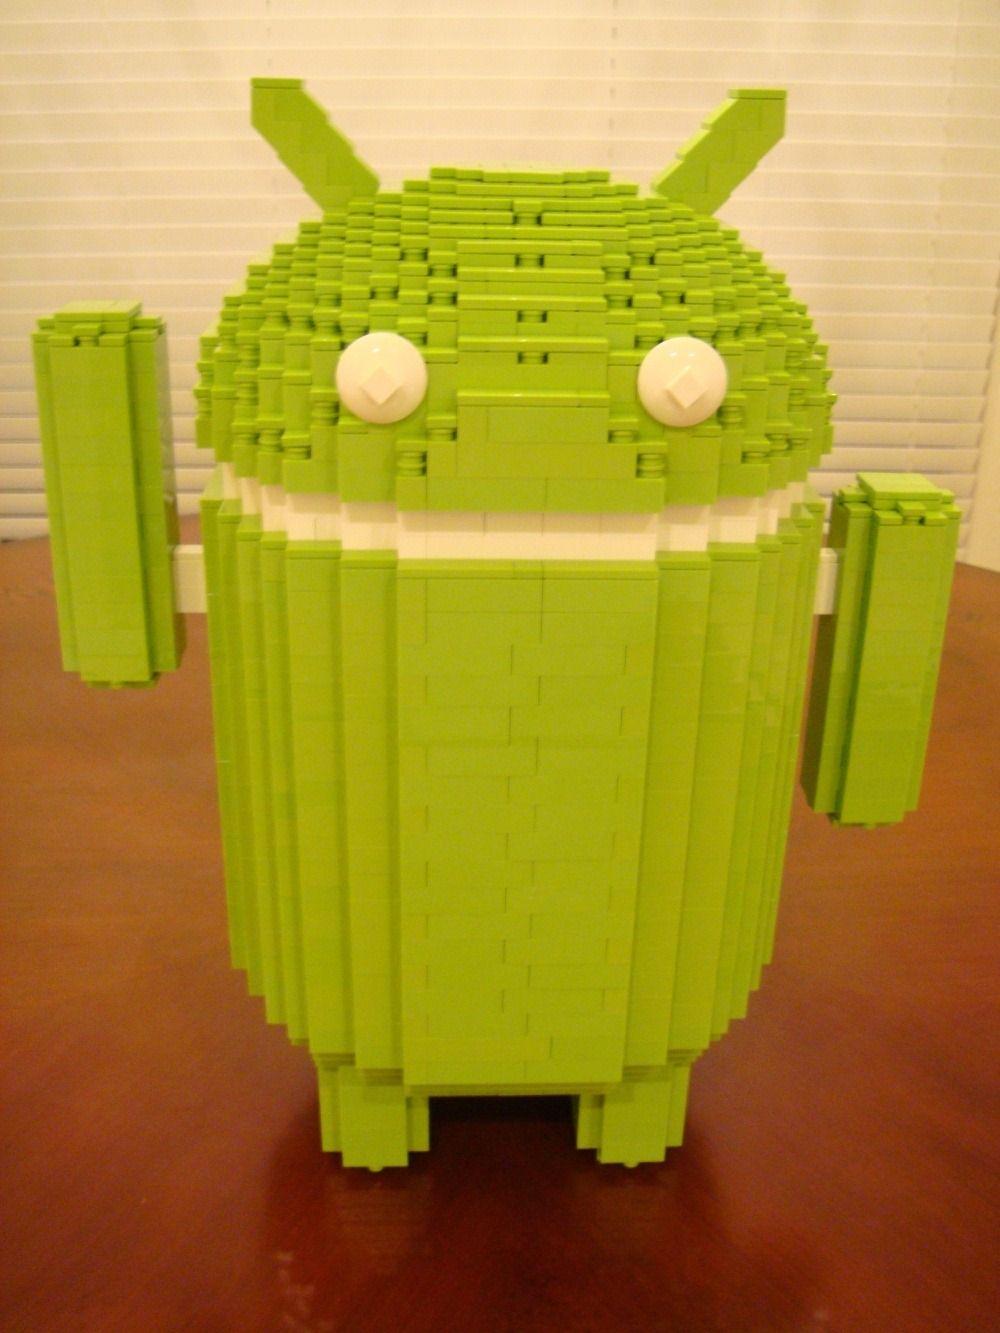 Cool Android Logo - Lego Just Became Cool Again - This 15